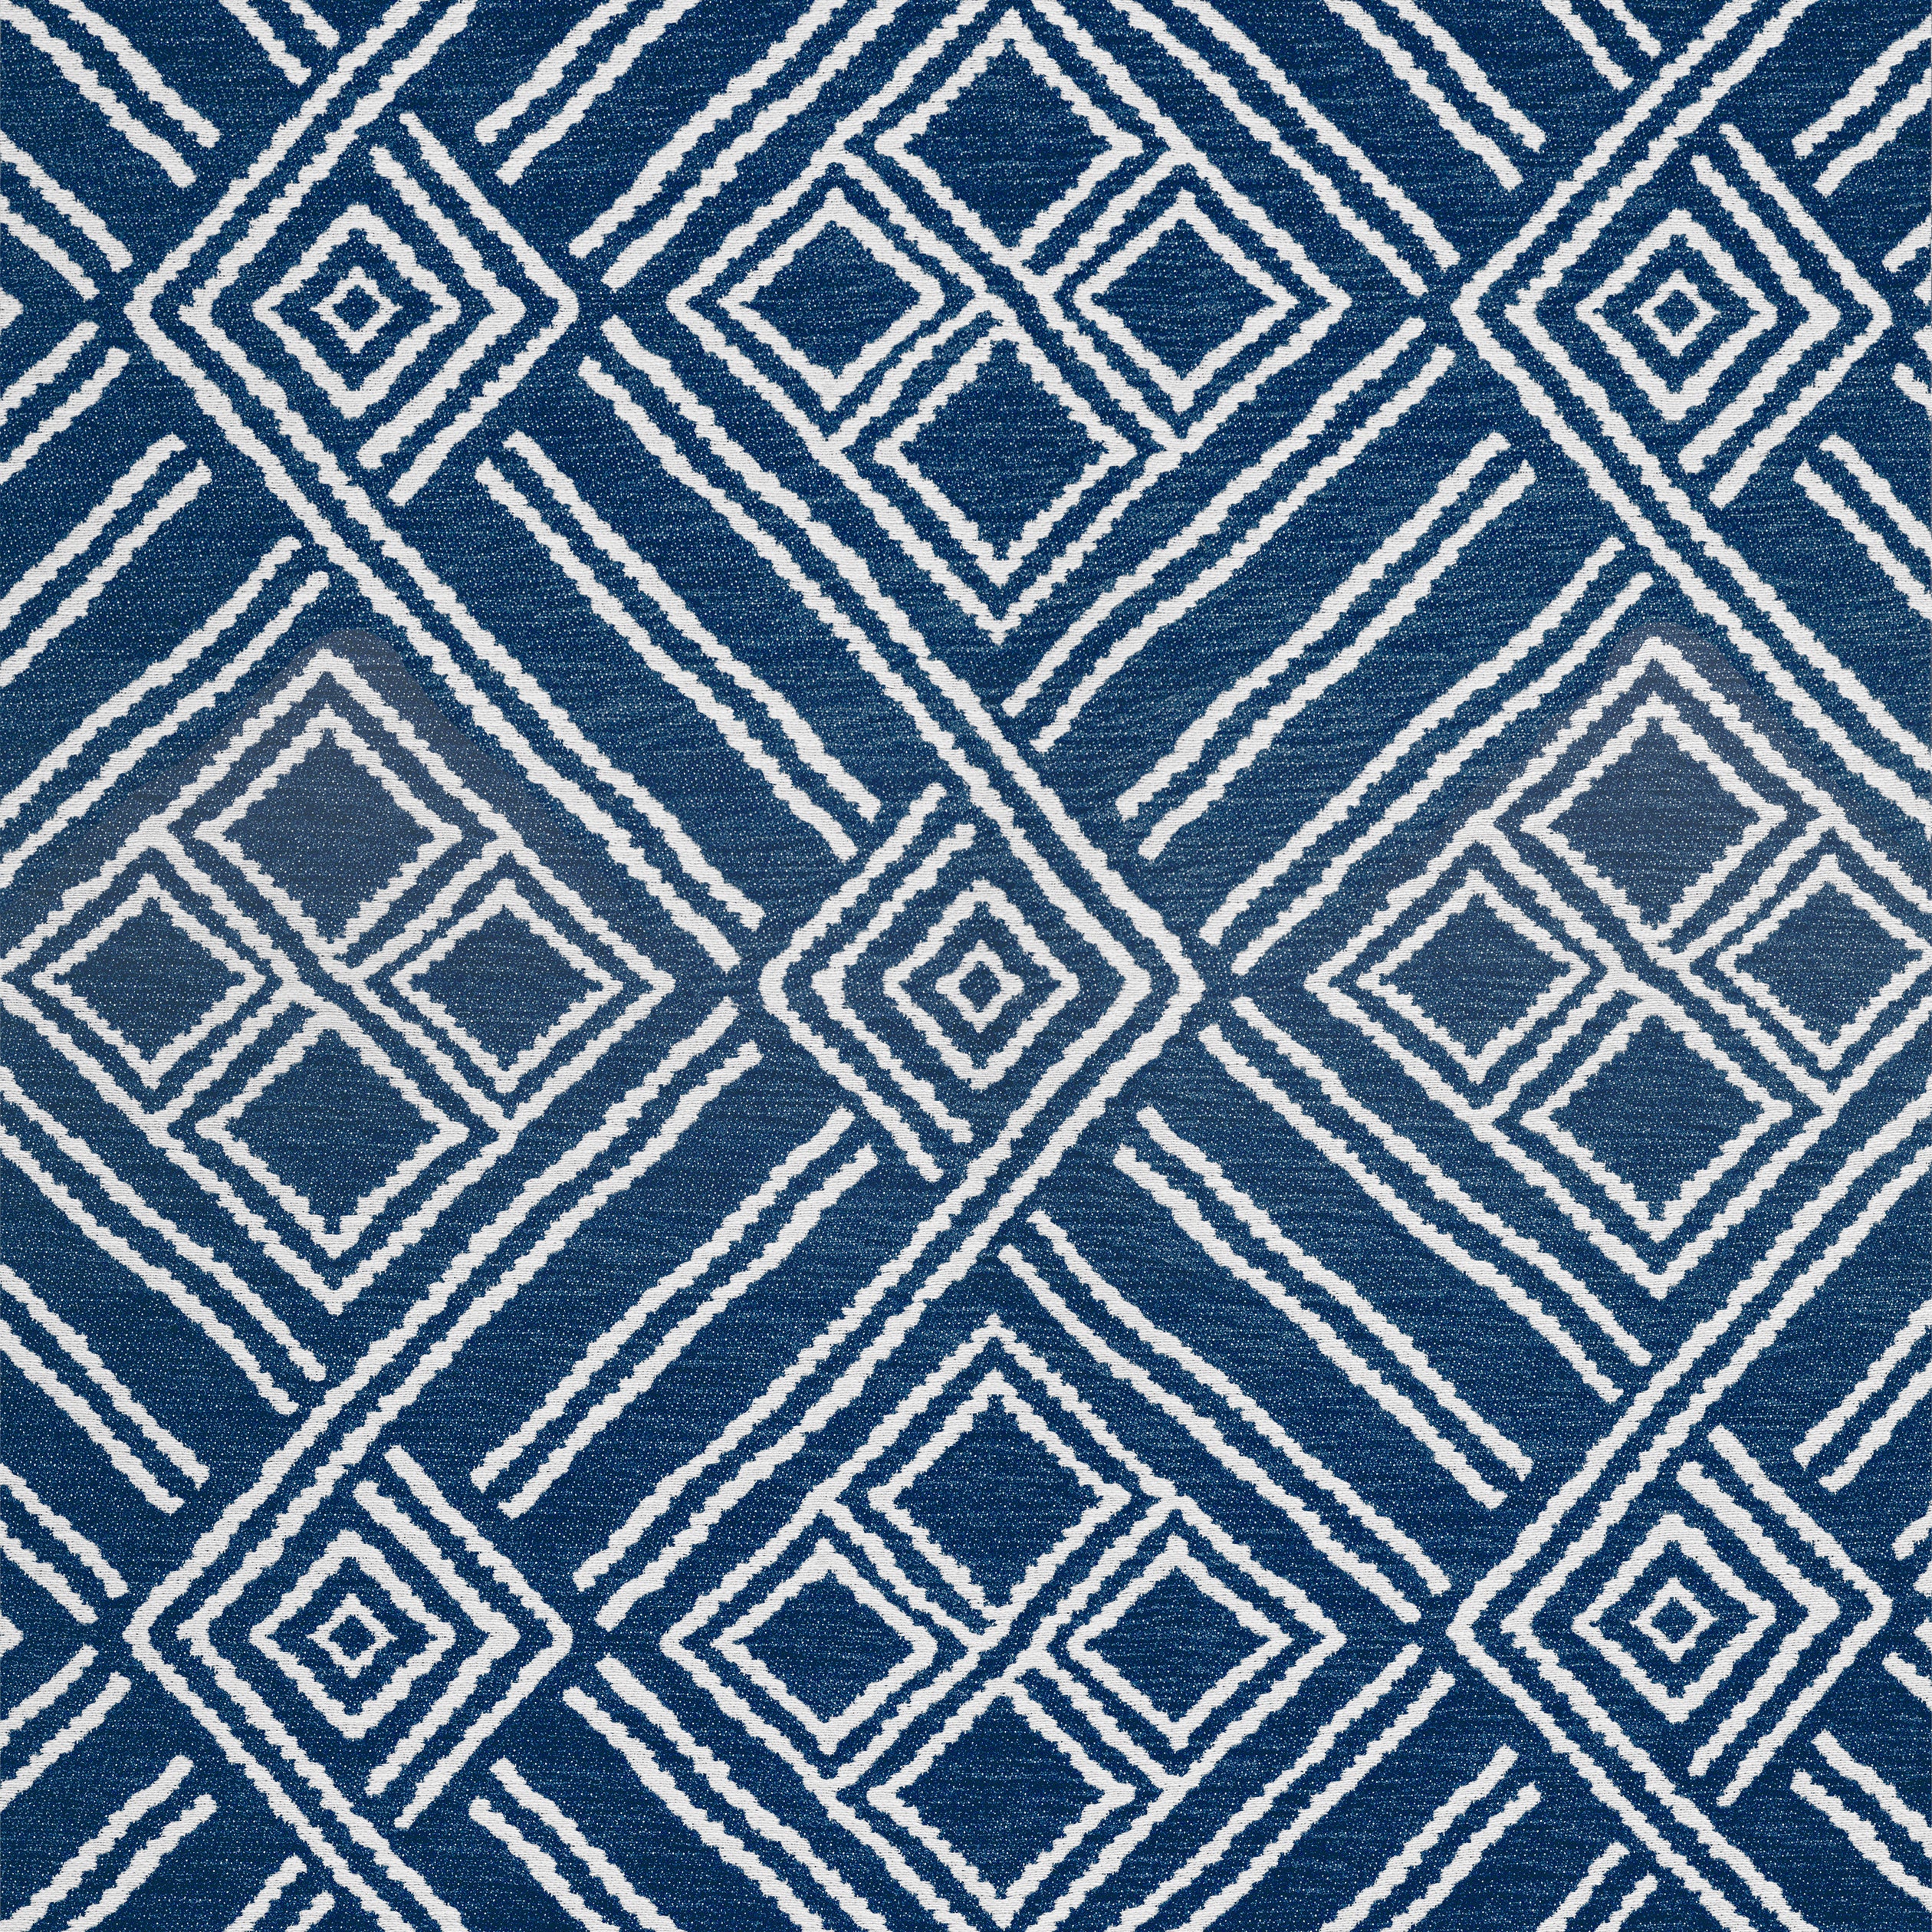 Terraza fabric in bermuda color - pattern number W8608 - by Thibaut in the Villa collection